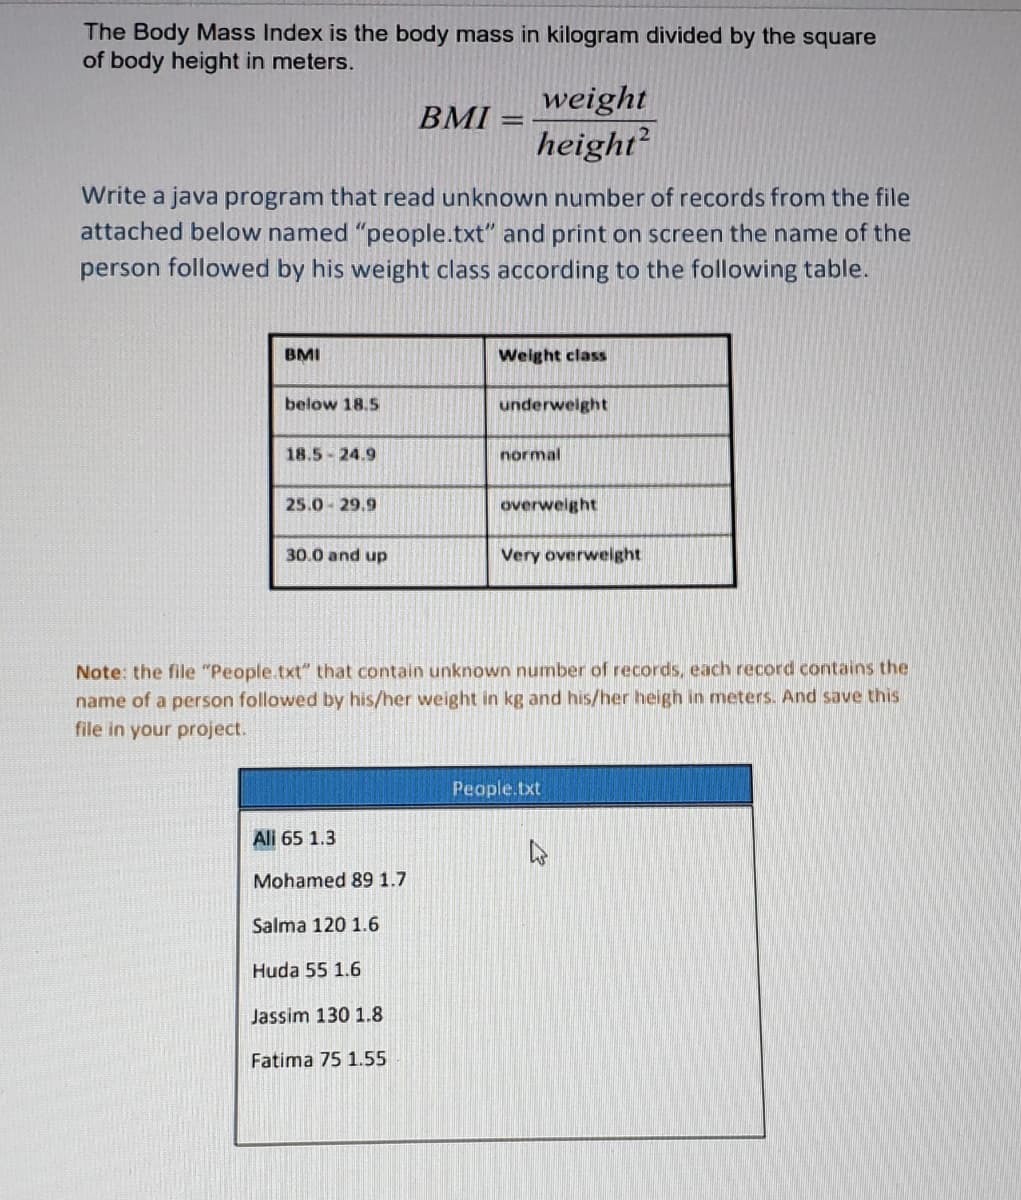 The Body Mass Index is the body mass in kilogram divided by the square
of body height in meters.
weight
height
BMI =
%3D
Write a java program that read unknown number of records from the file
attached below named “people.txt" and print on screen the name of the
person followed by his weight class according to the following table.
BMI
Weight class
below 18.5
underwelght
18.5-24.9
normal
25.0 29,9
overweight
30.0 and up
Very overweight
Note: the file "People.txt" that contain unknown number of records, each record contains the
name of a person followed by his/her weight in kg and his/her heigh in meters. And save this
file in your project.
People.txt
Ali 65 1.3
Mohamed 89 1.7
Salma 120 1.6
Huda 55 1.6
Jassim 130 1.8
Fatima 75 1.55
